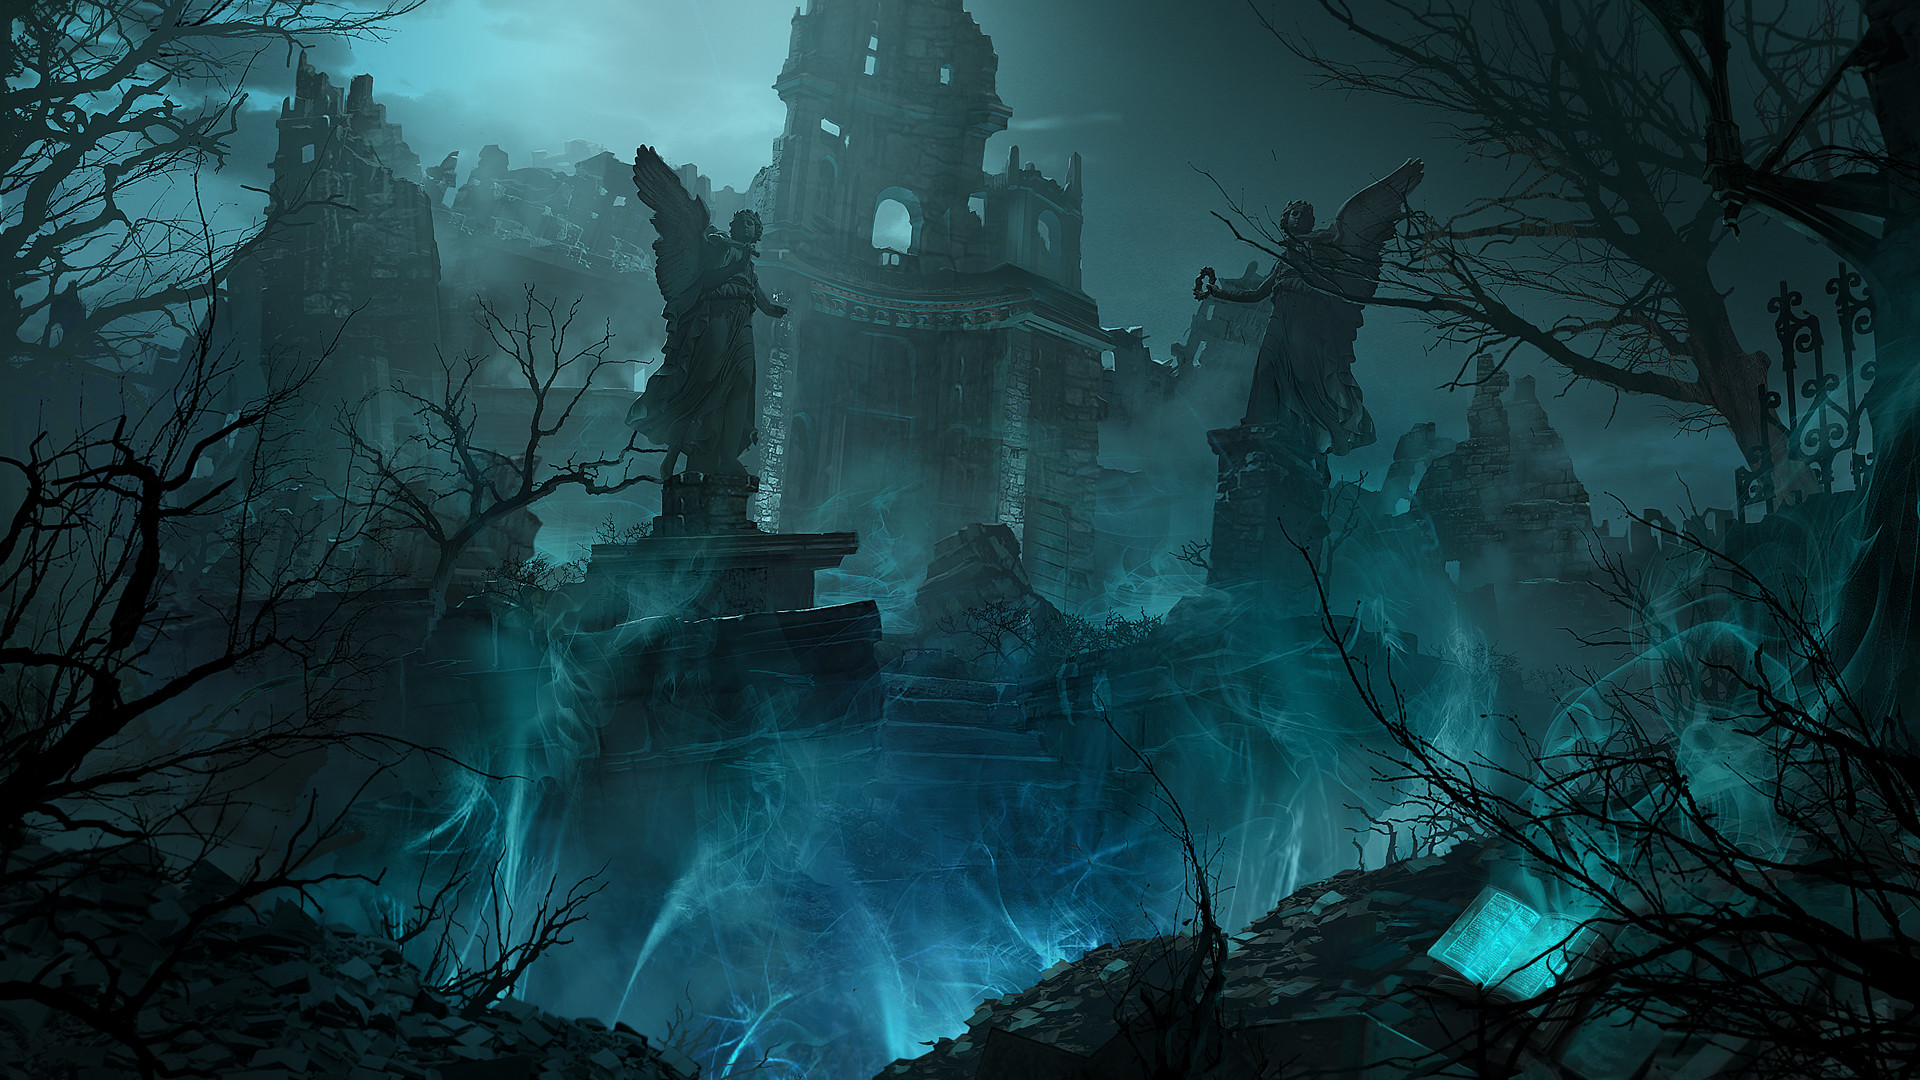 1920x1080 Dev Blog: Into the Mists: Creating Shadow and Fortune03.11.2015